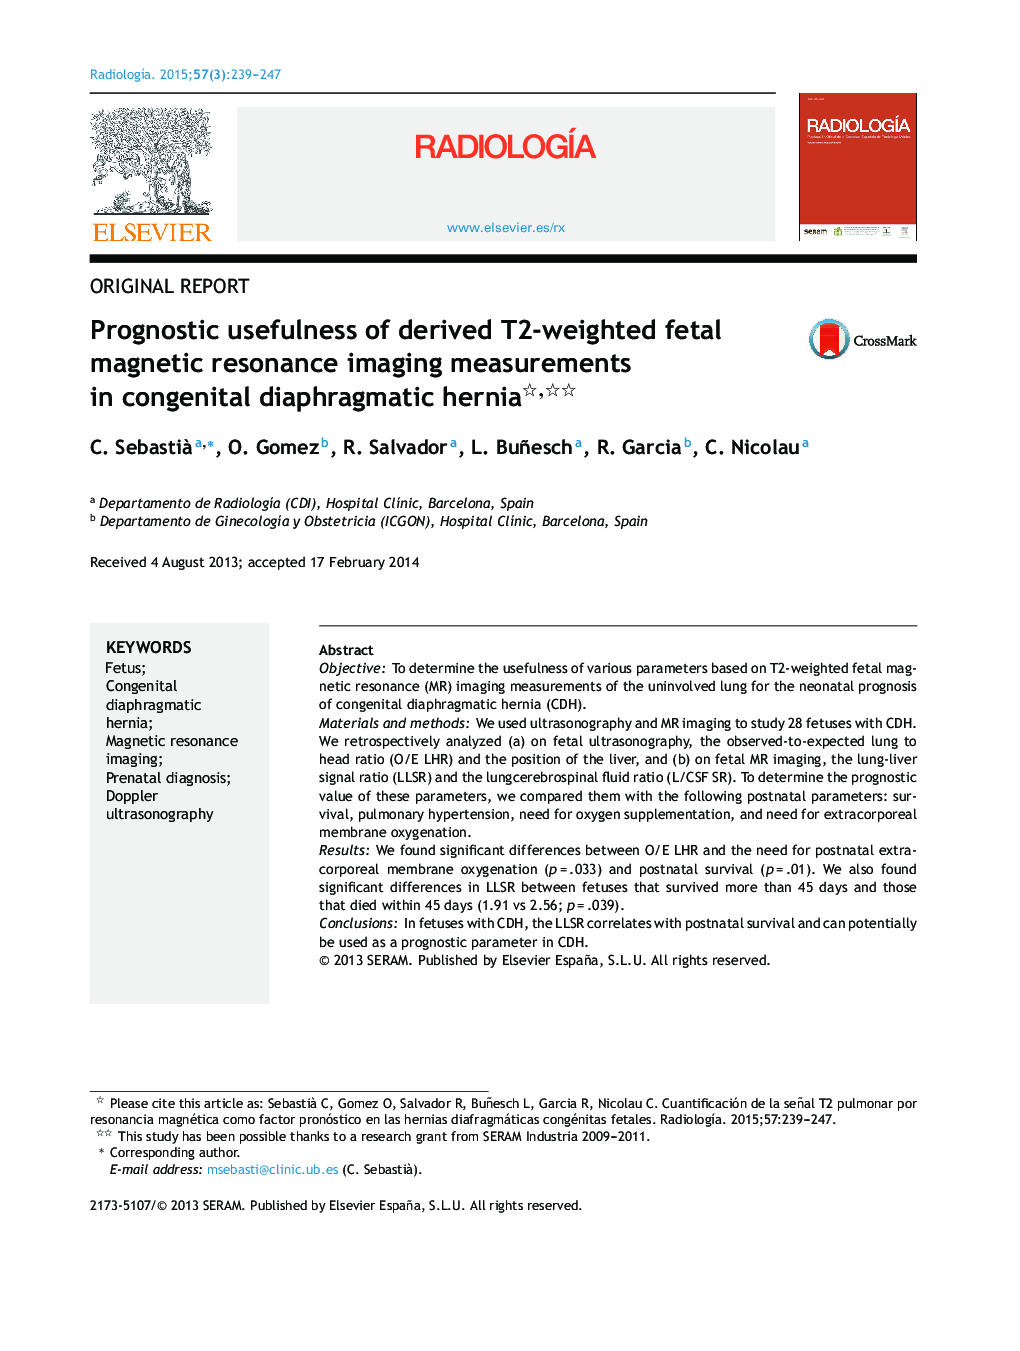 Prognostic usefulness of derived T2-weighted fetal magnetic resonance imaging measurements in congenital diaphragmatic hernia 